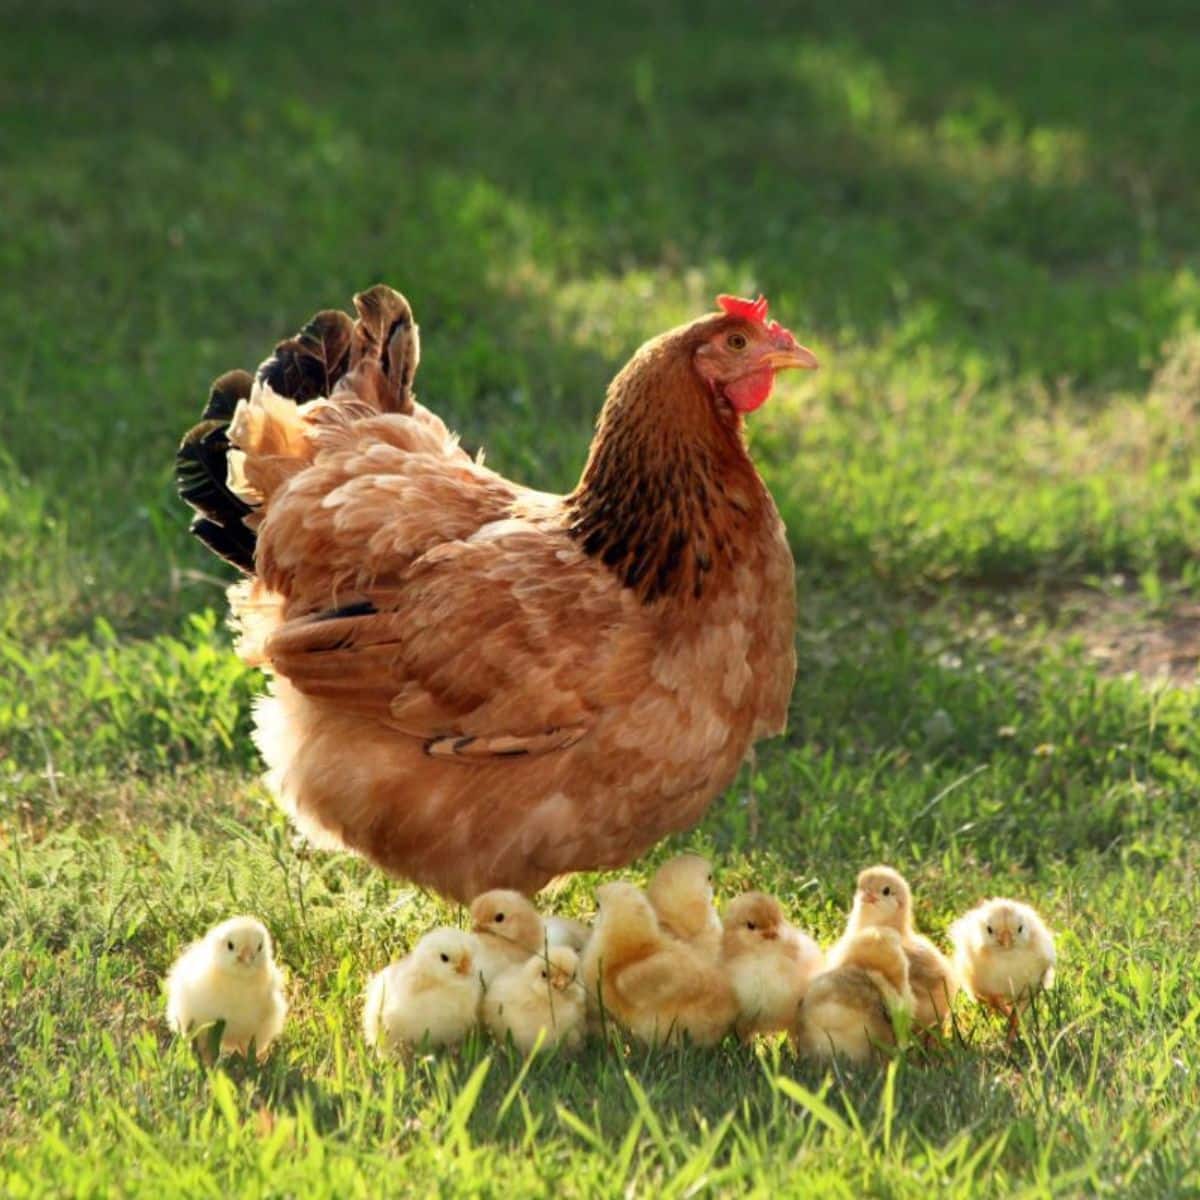 A brown chicken with chicks in a backyard on a sunny day.